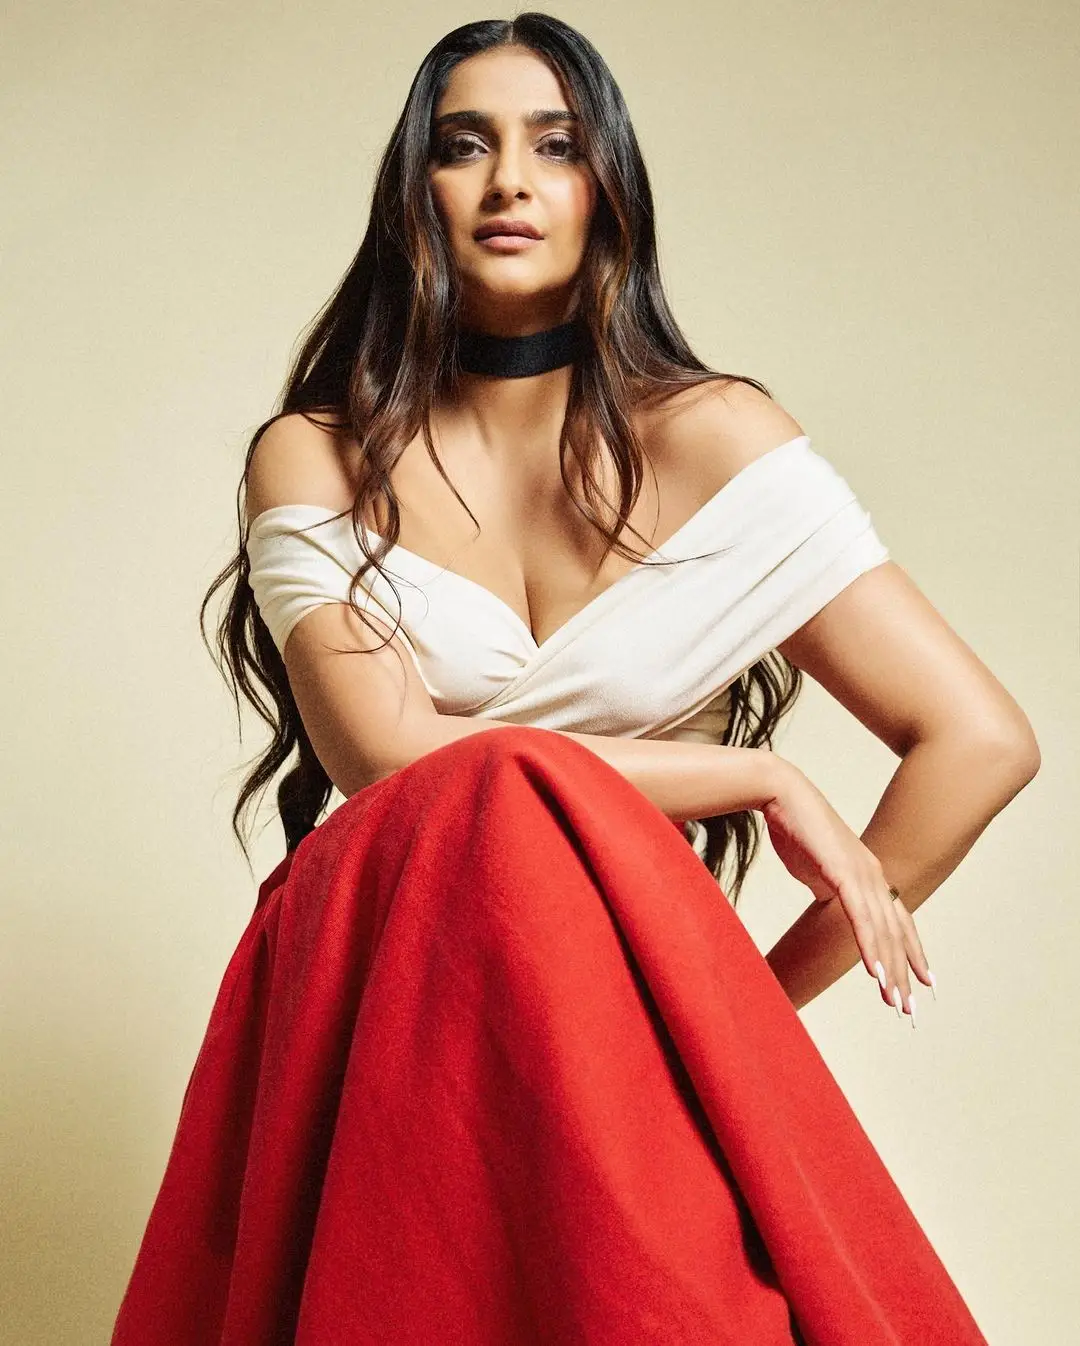 BOLLYWOOD ACTRESS SONAM KAPOOR PHOTOSHOOT IN RED GOWN